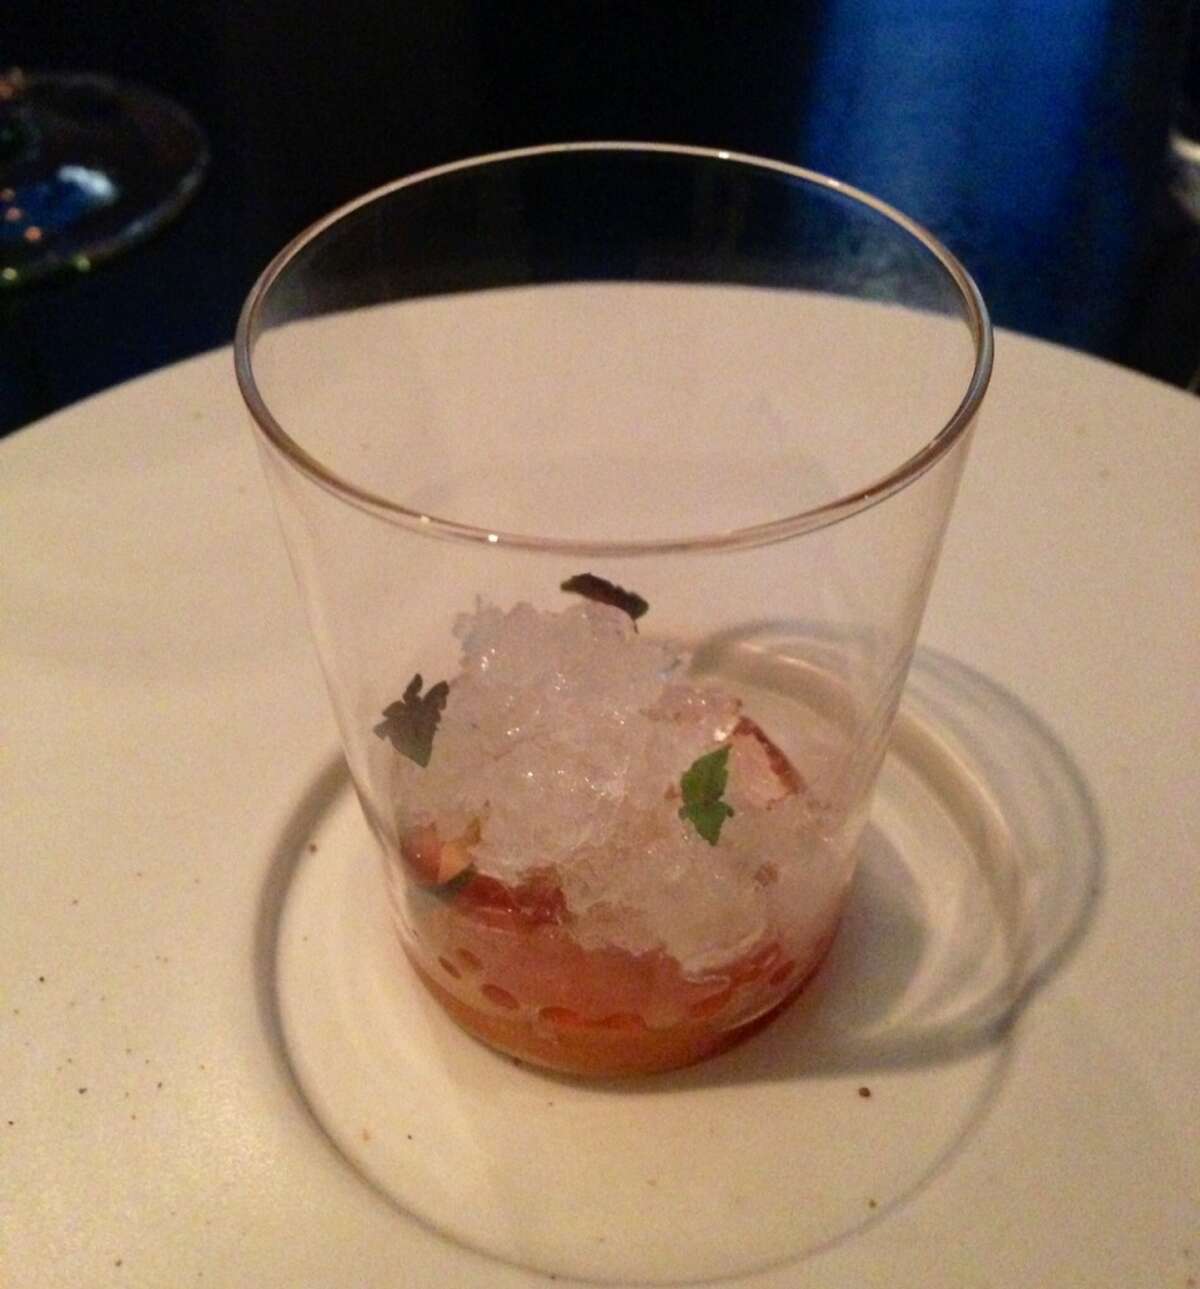 Monkfish liver with trout roe and sake ice.